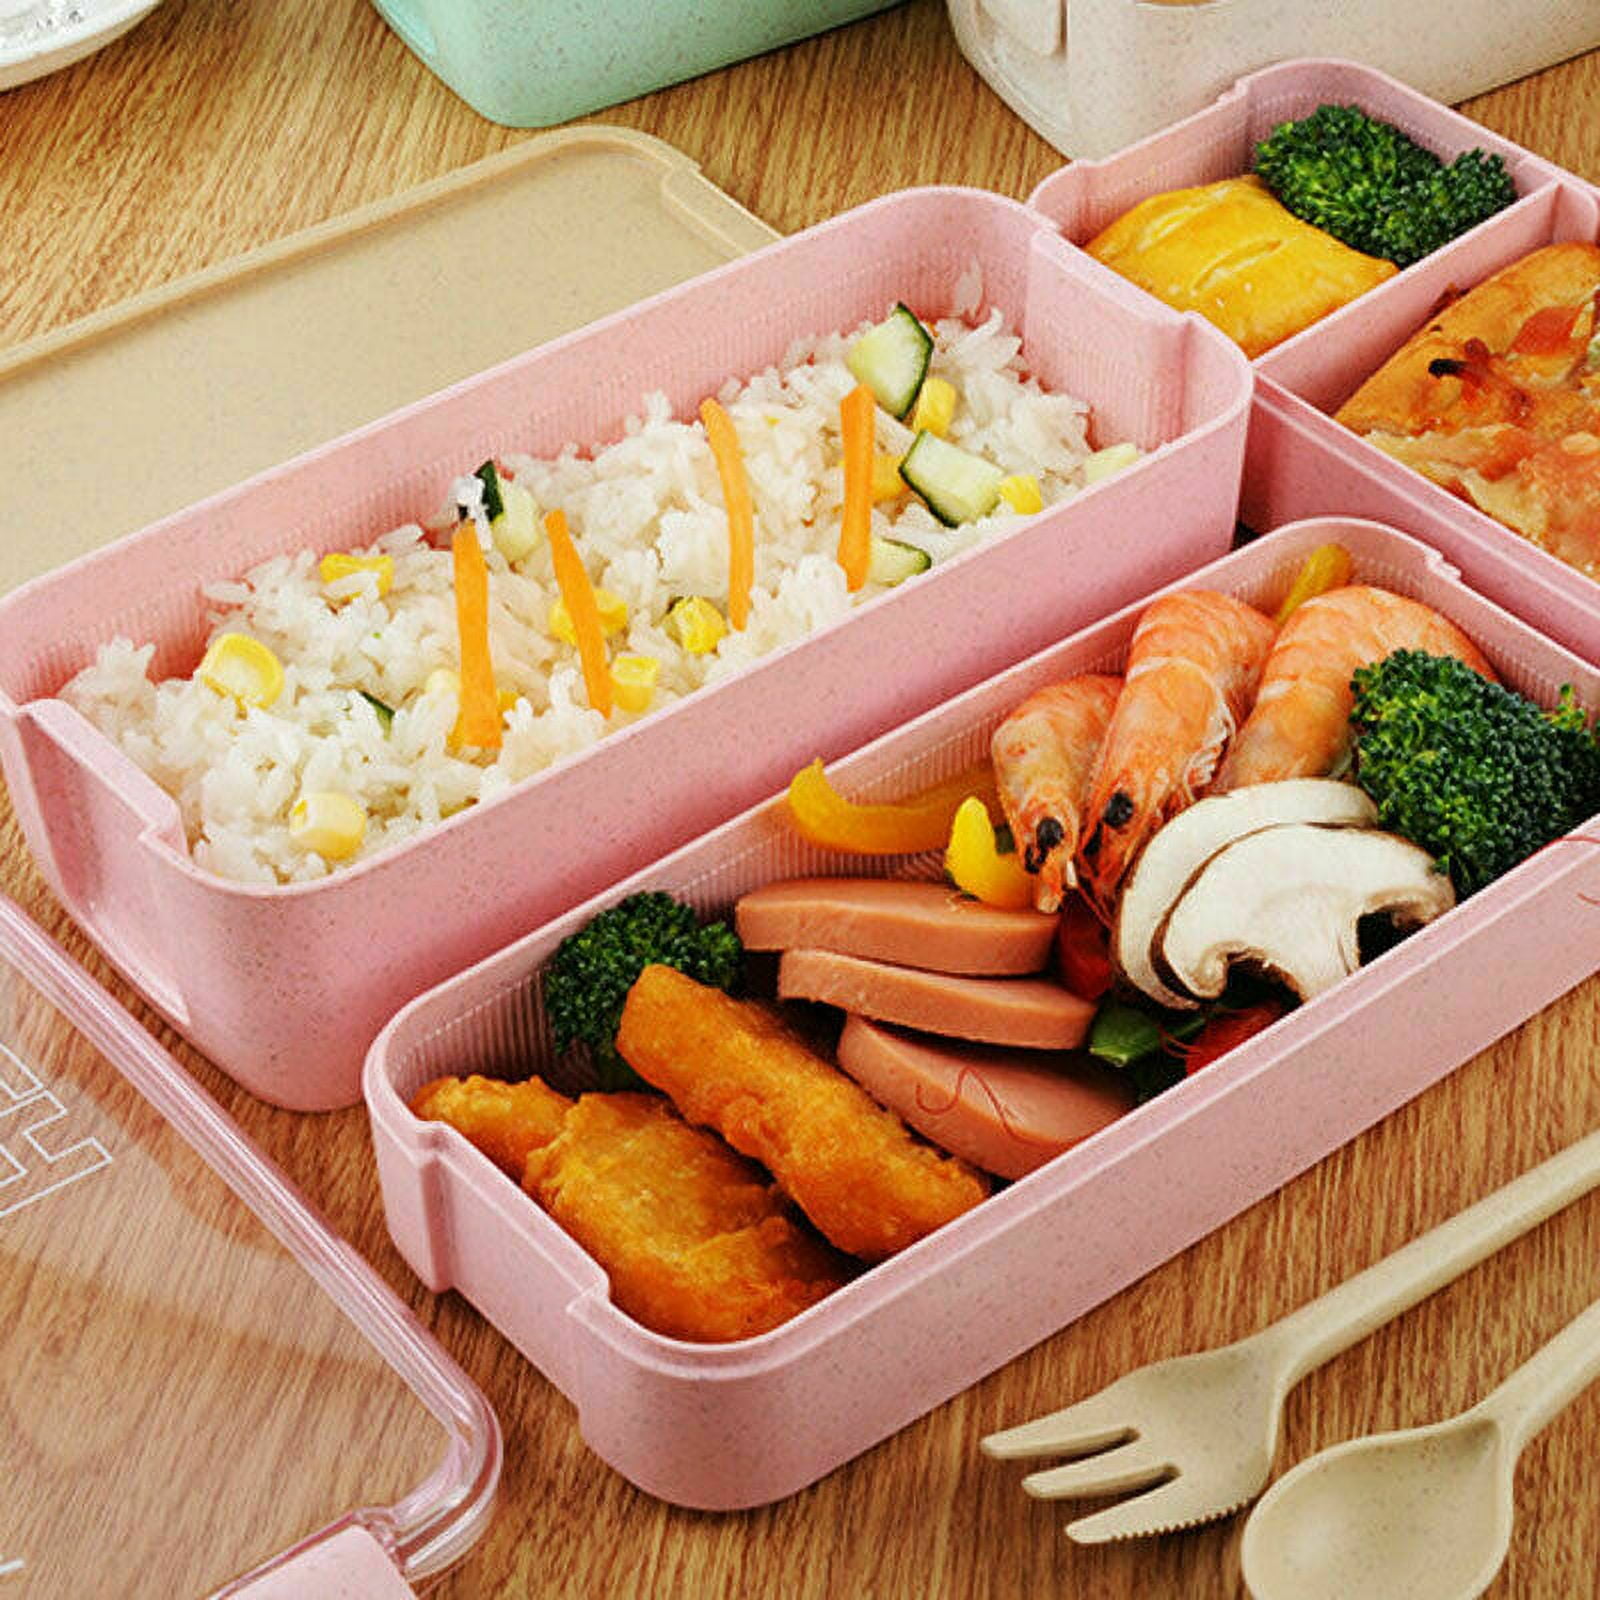 jijoe 27 PCs Bento Box Lunch Kit, Stackable 3-in-1 Compartment Japanese Set  w/Soup Cup Sauce Can, Sp…See more jijoe 27 PCs Bento Box Lunch Kit